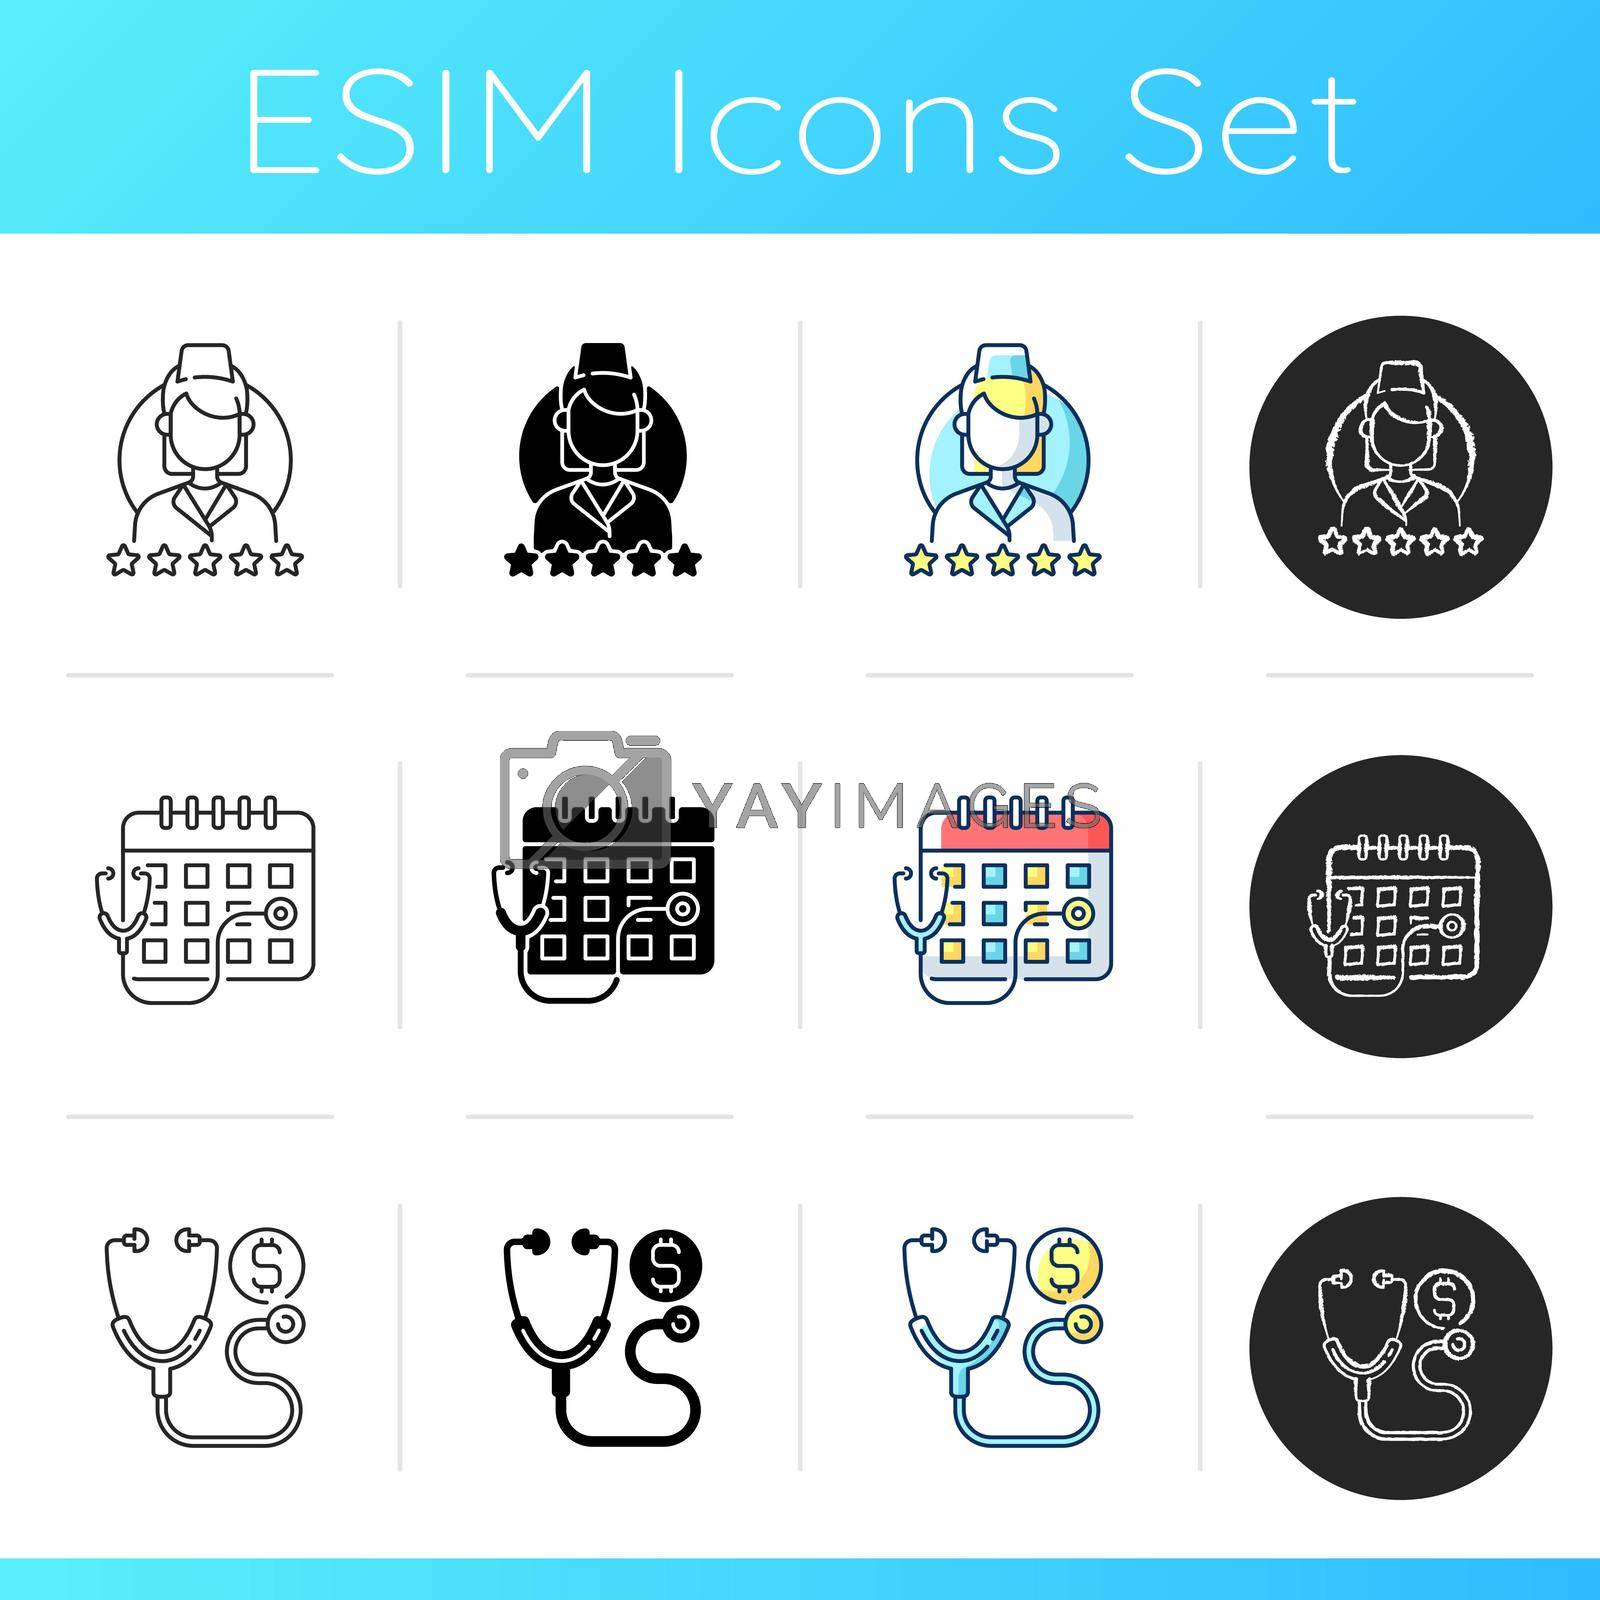 Medicine and healthcare icons set. Consultation time. Primary care doctor visit. Review doctor. Doctor check up cost. Linear, black and RGB color styles. Isolated vector illustrations